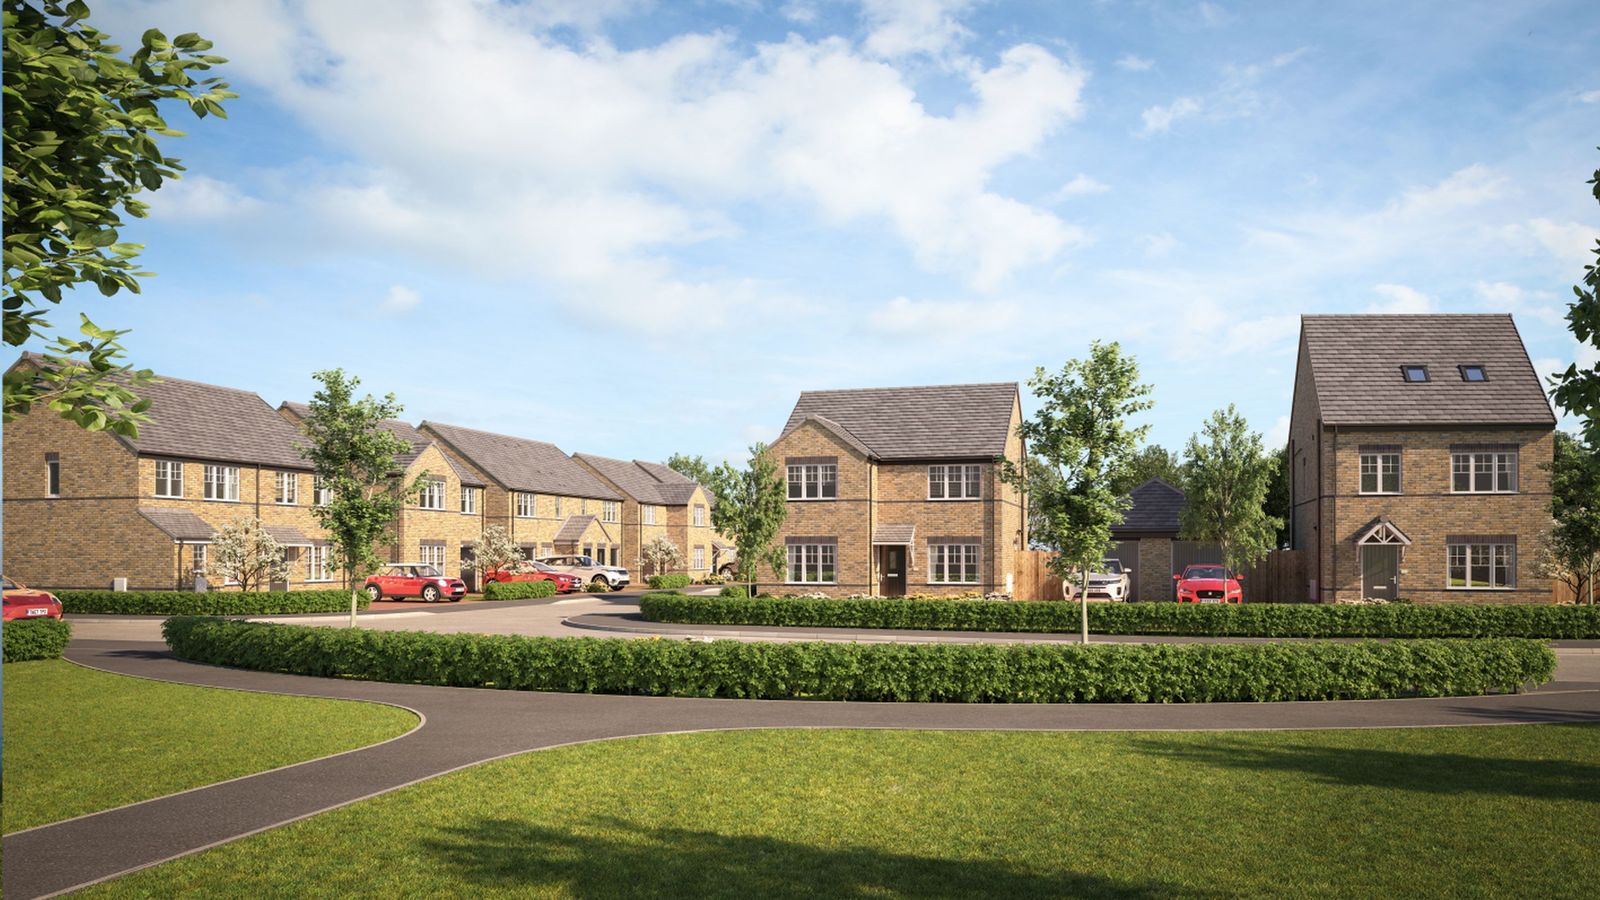 House builder launches first family homes in Keighley